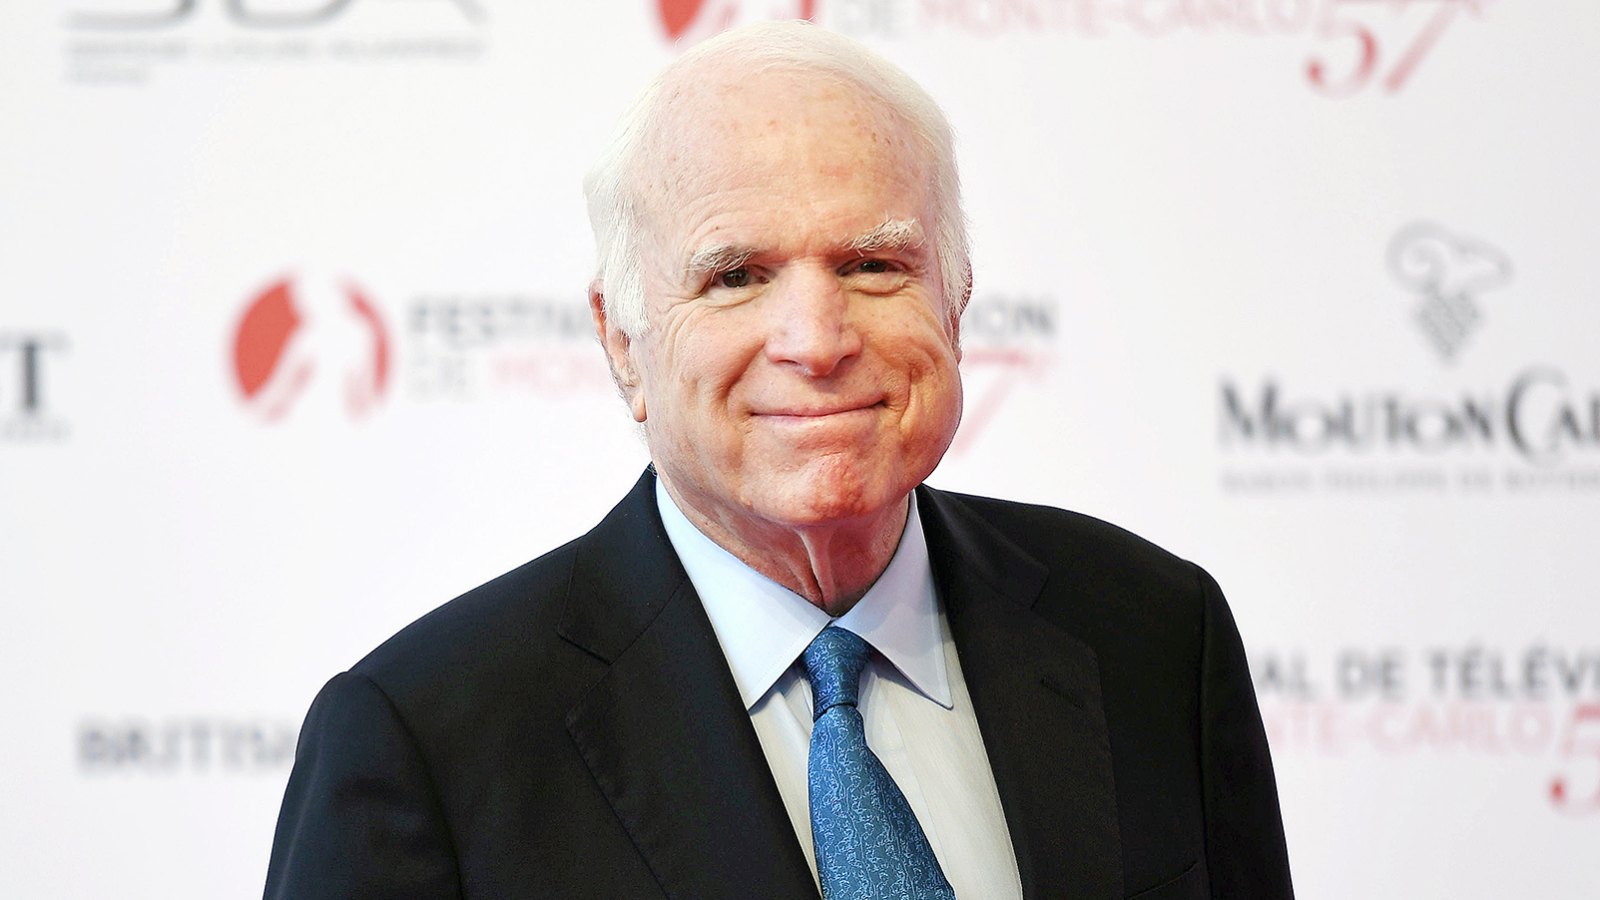 John McCain Hospitalized Due to Side Effects From Cancer Treatment